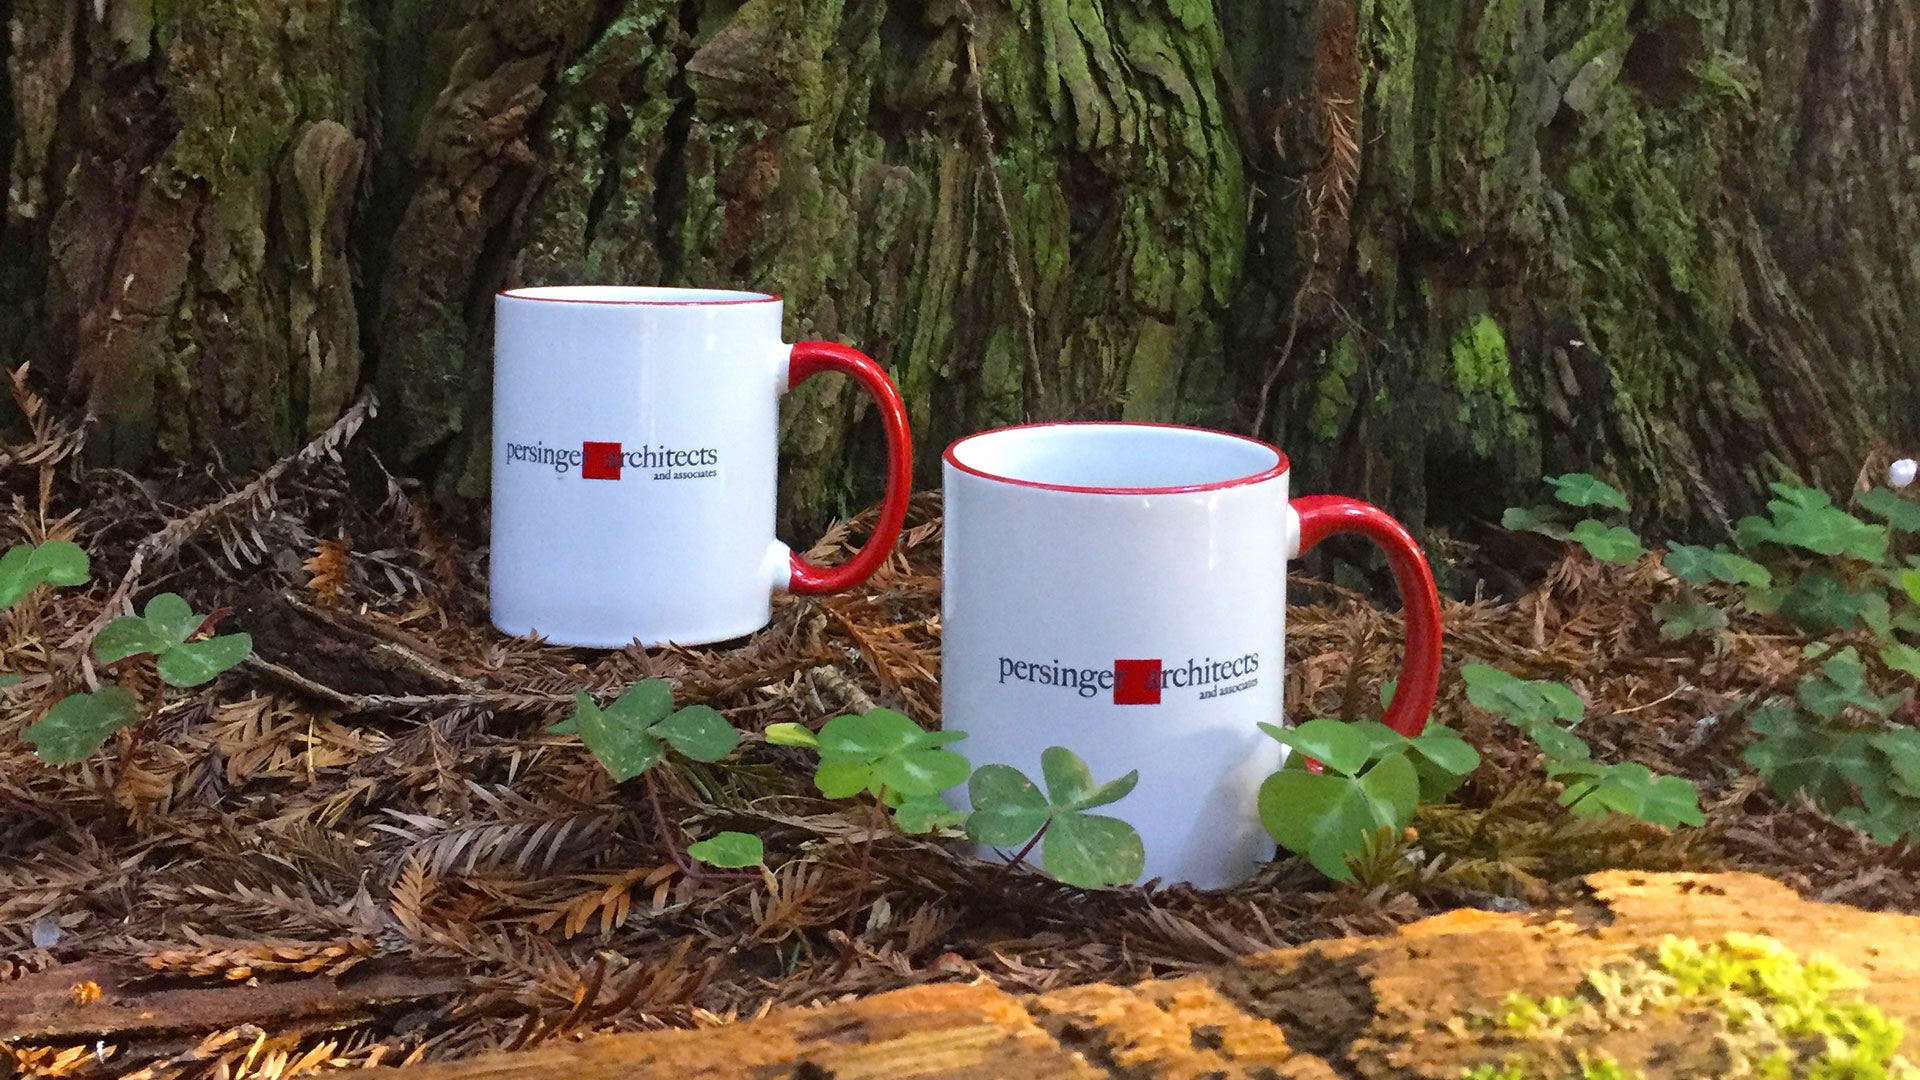 Pair of persinger mugs on forest floor at base of large tree